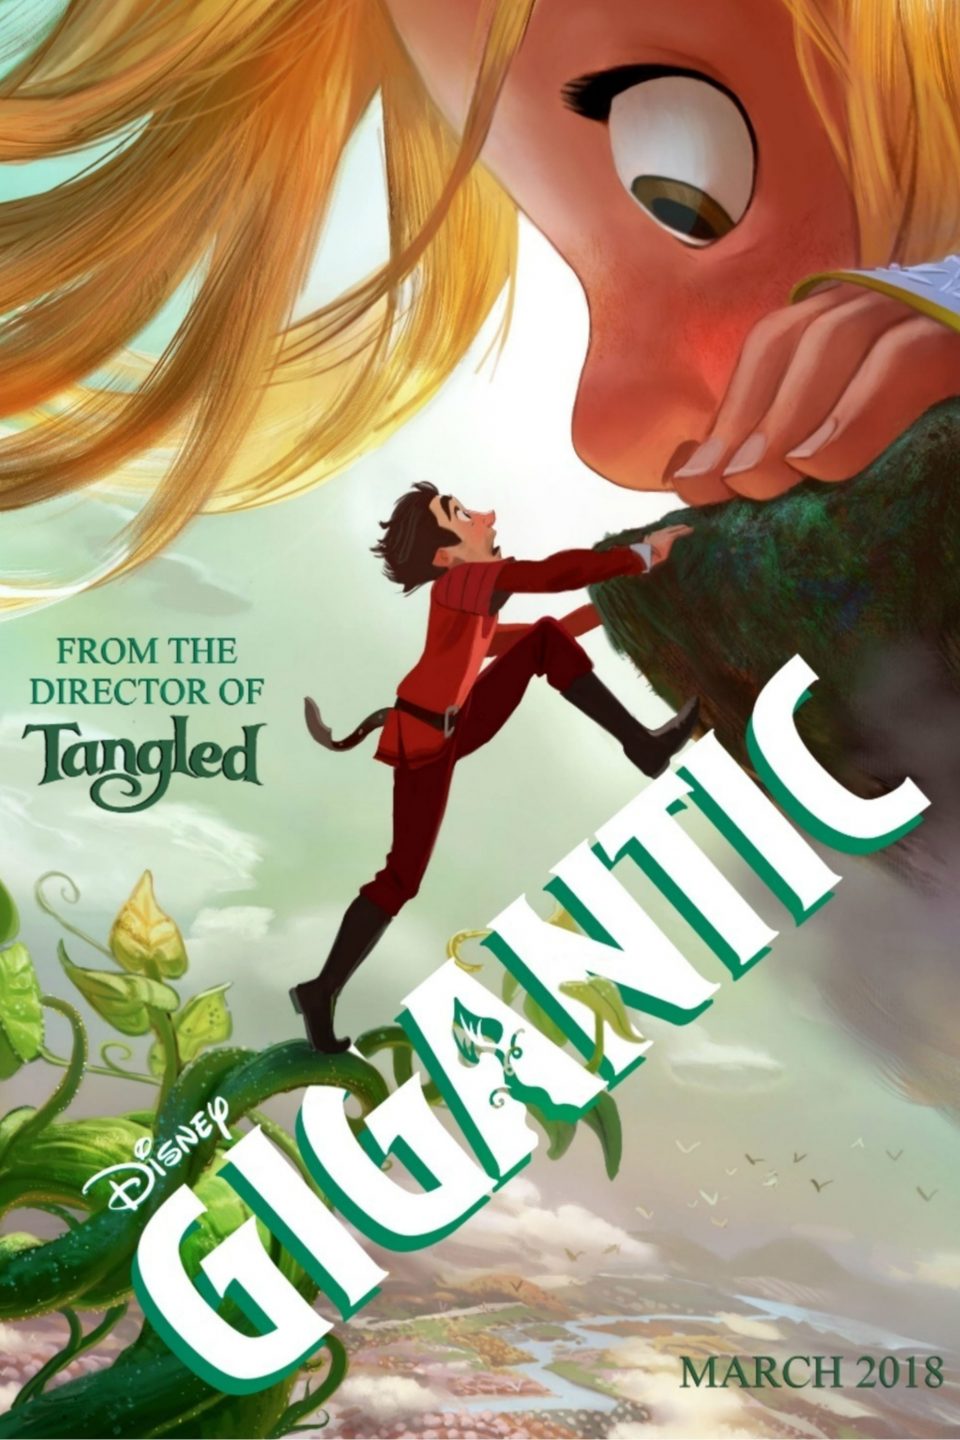 Poster for the movie "Gigantic"